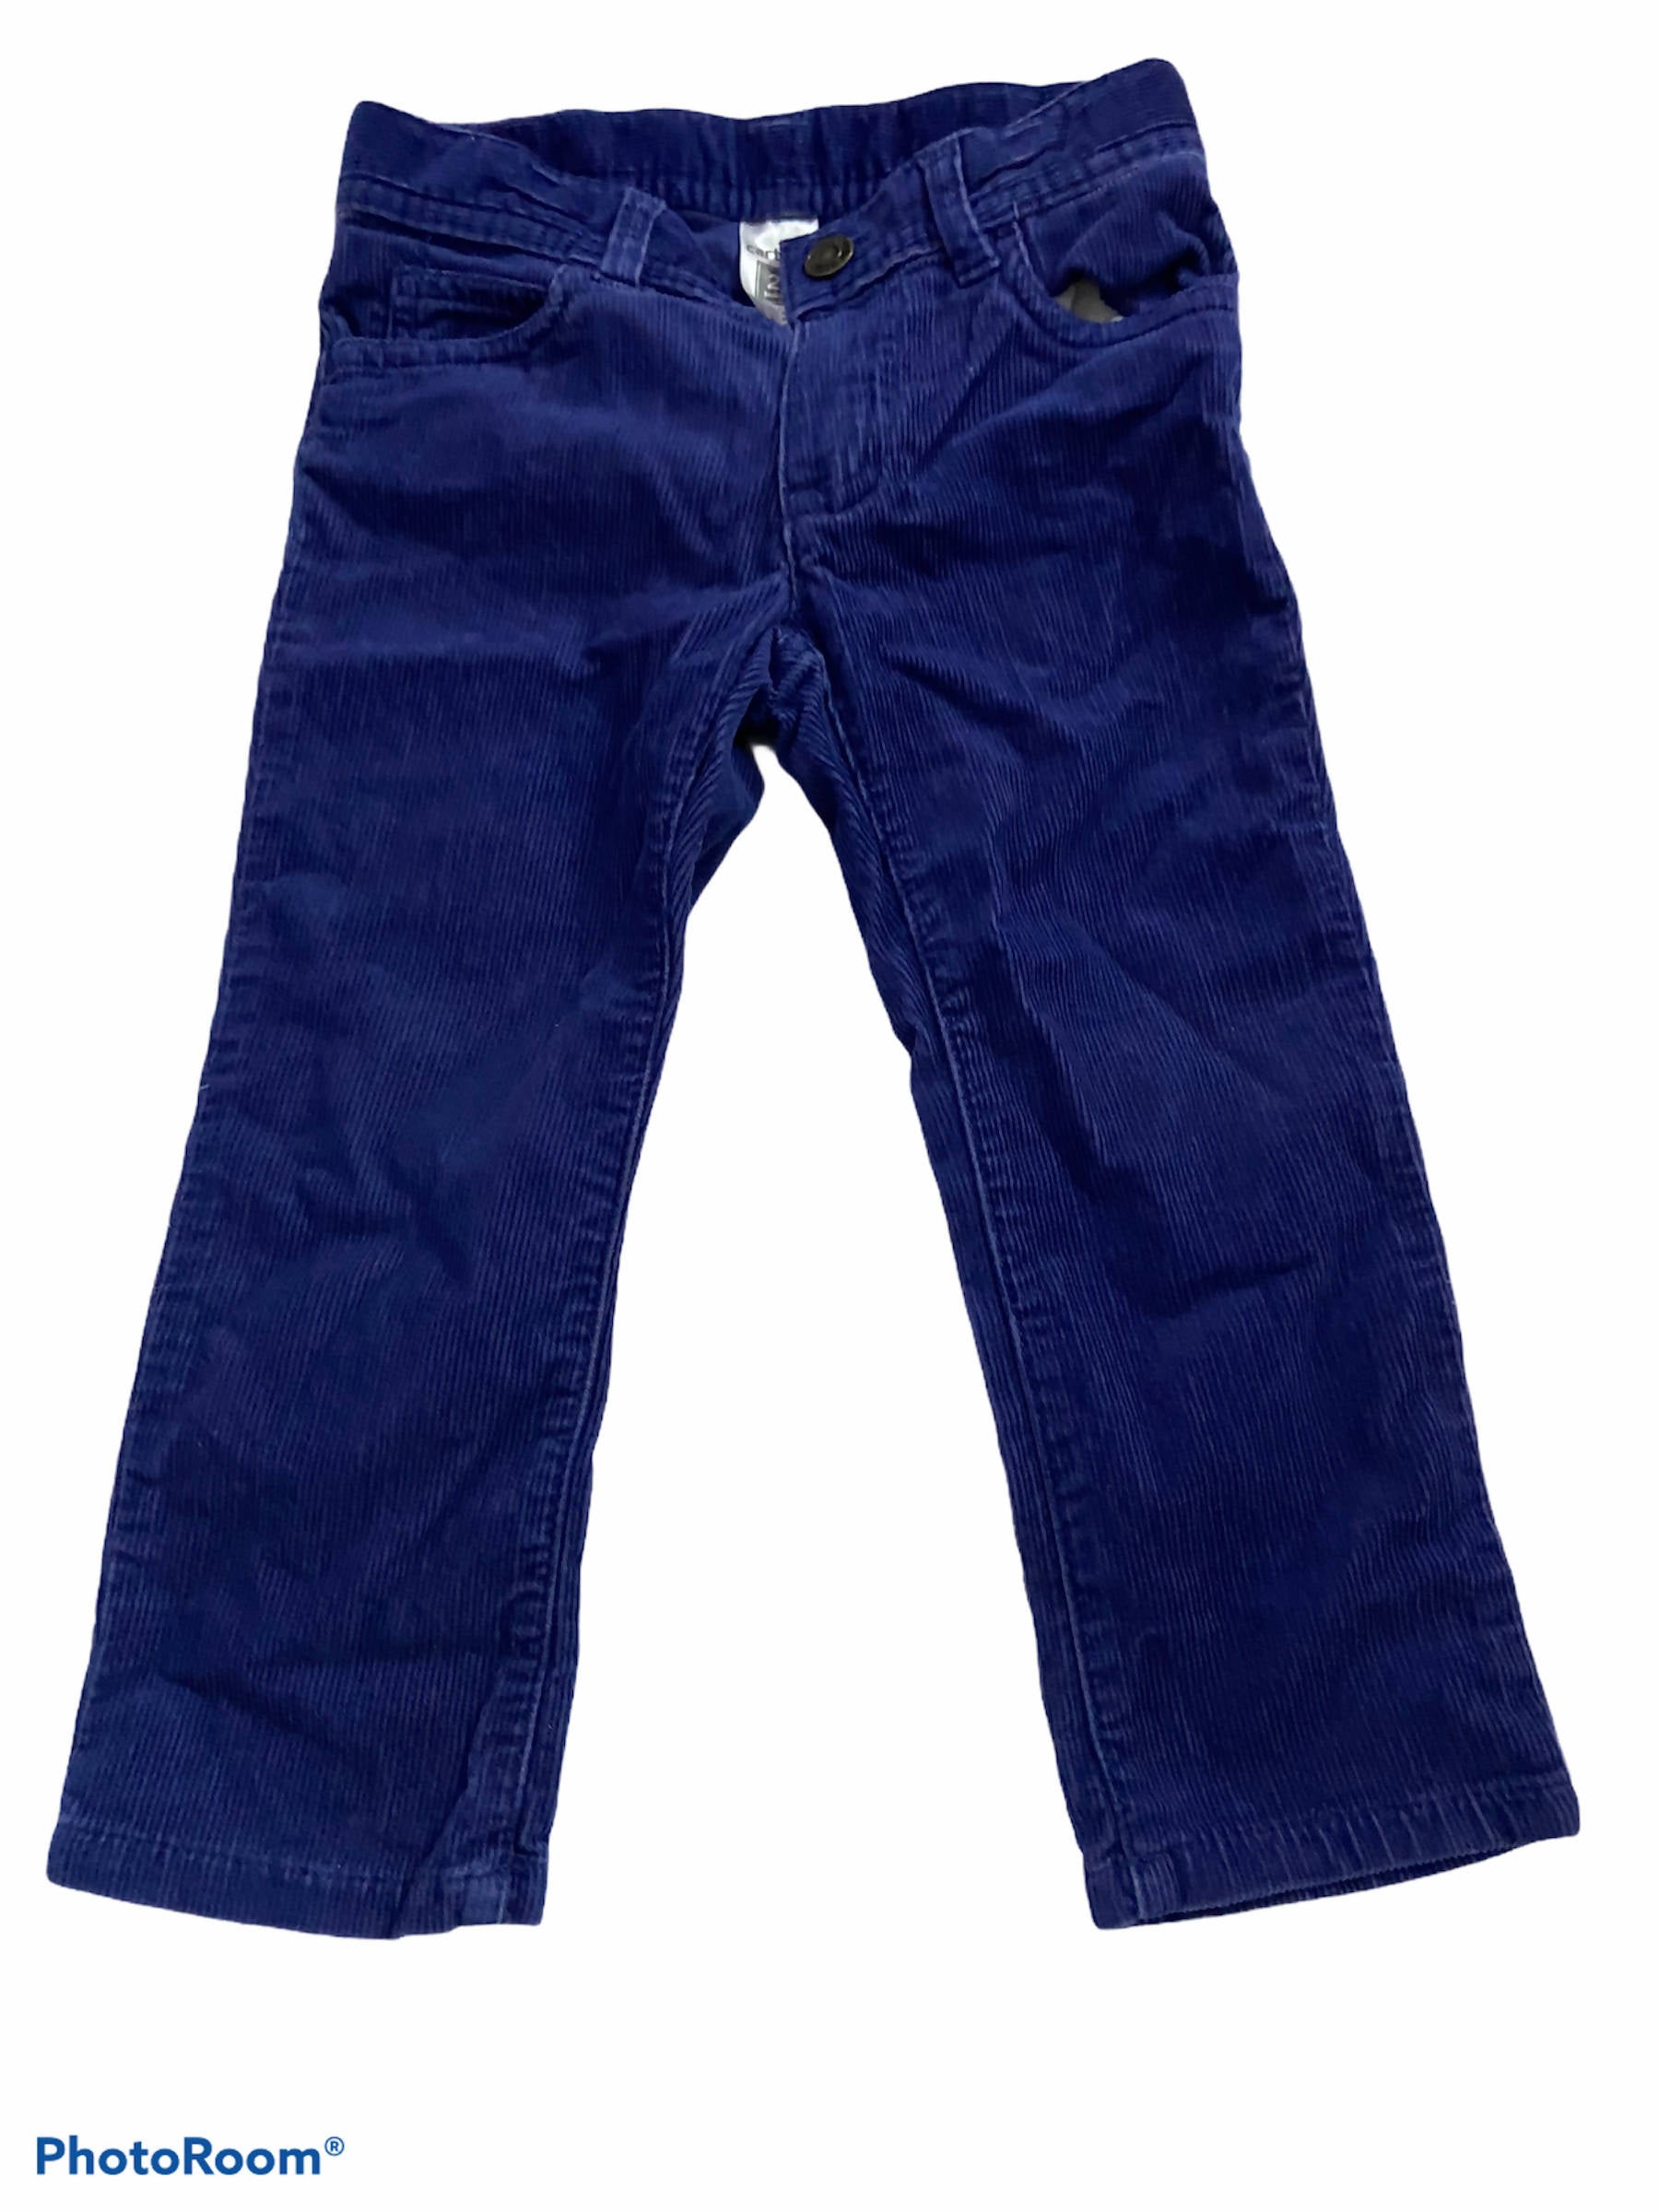 Carters jeans | Girls | Size 2T |Preloved